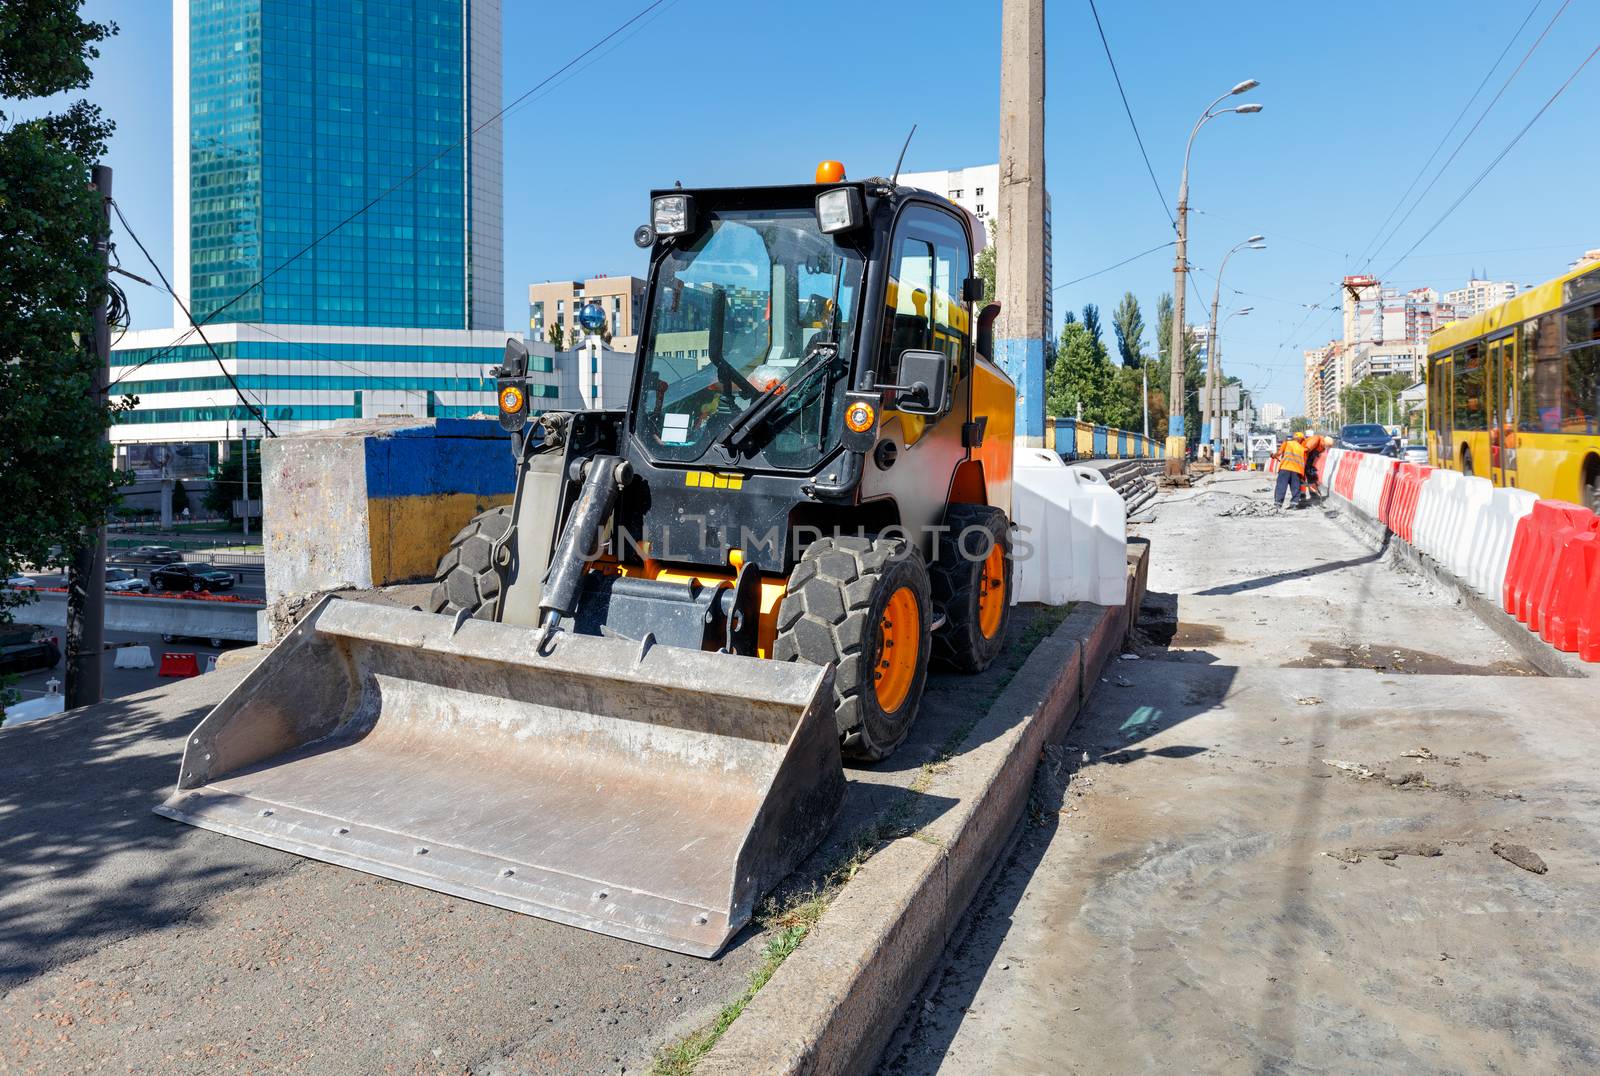 A light construction bulldozer during the repair of an asphalt road on a city street at noon.